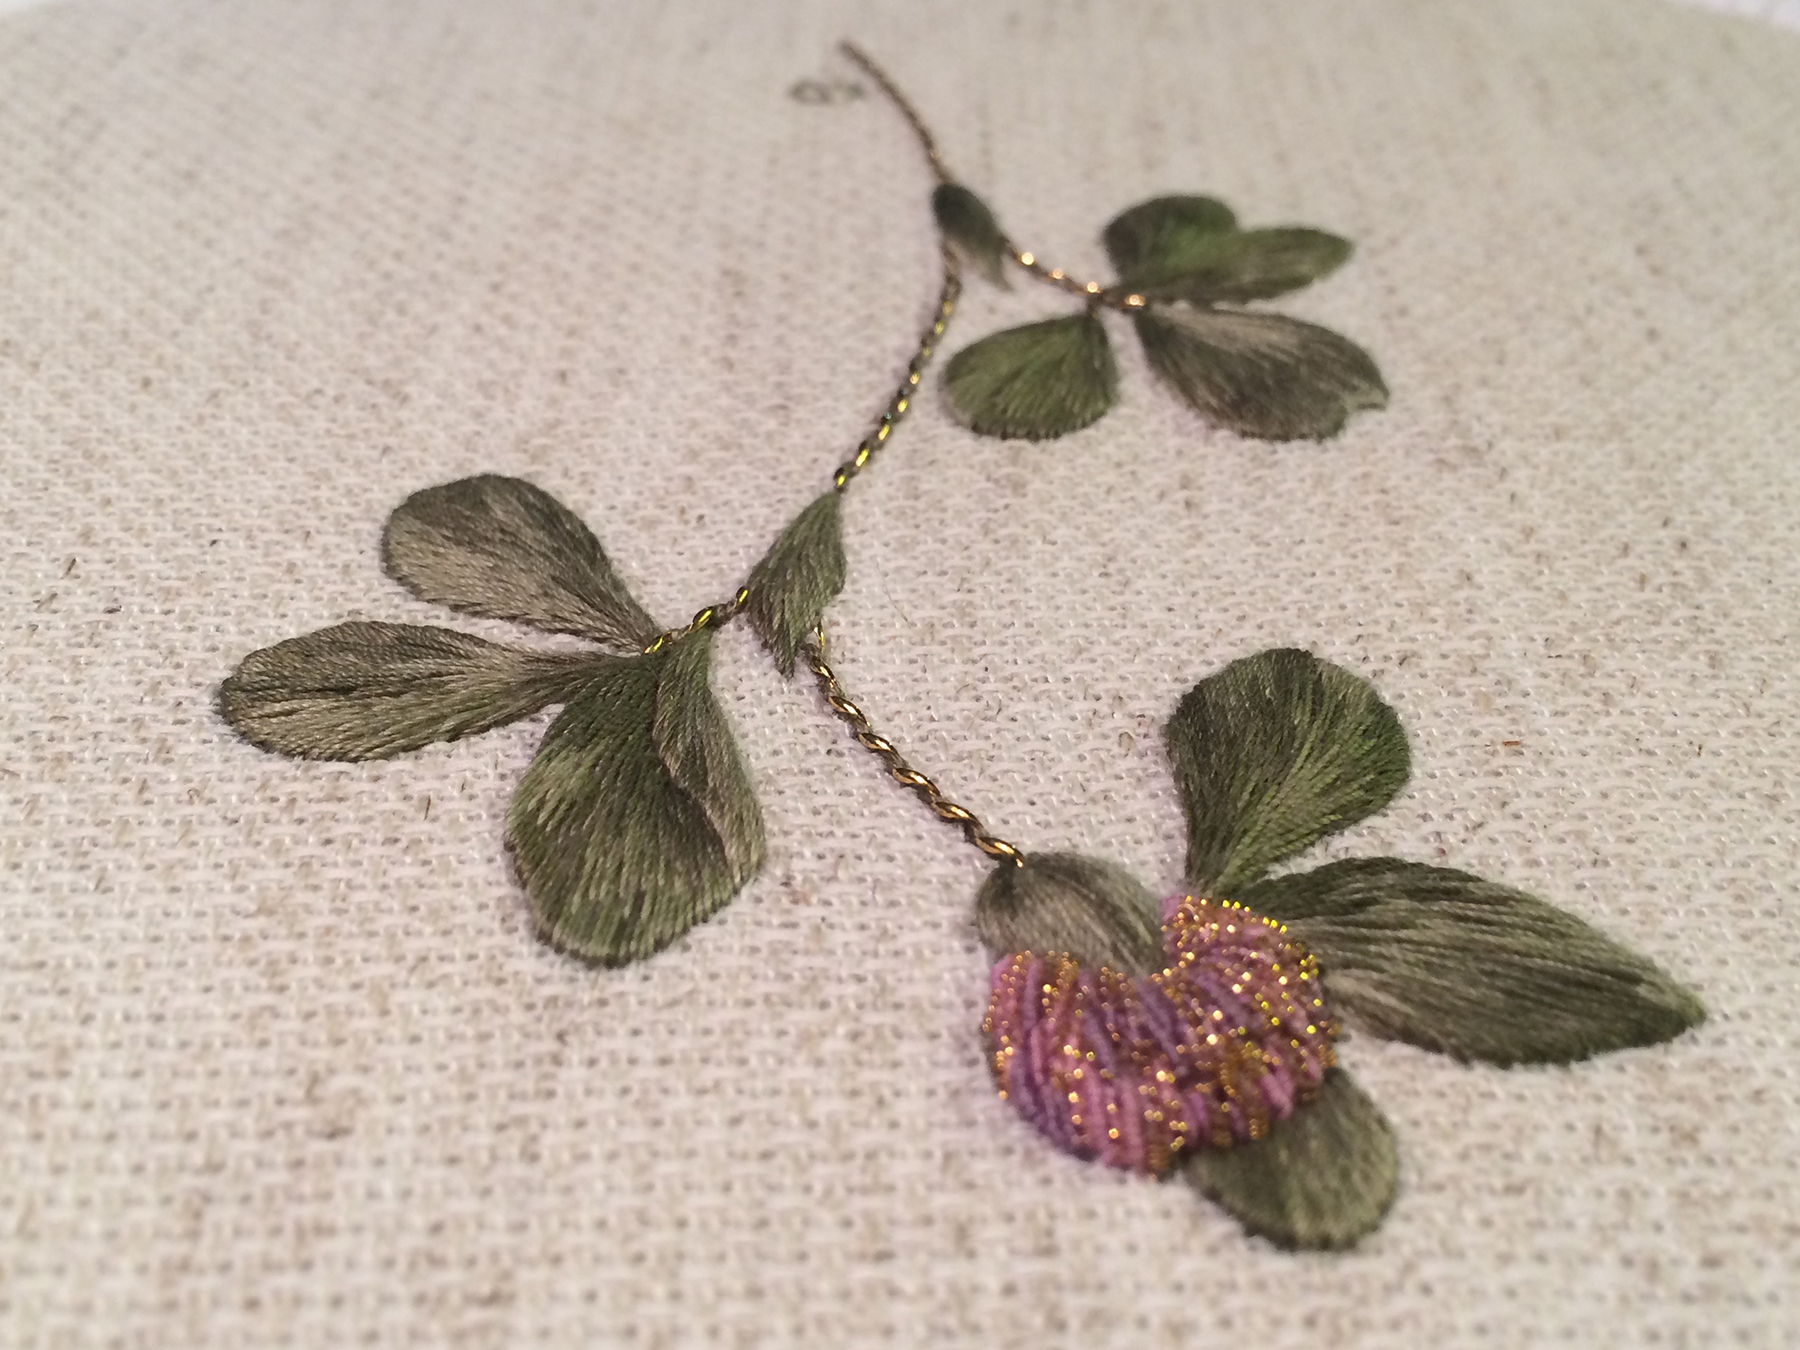 Register today for Red Clover, an online class with teacher Katherine Diuguid